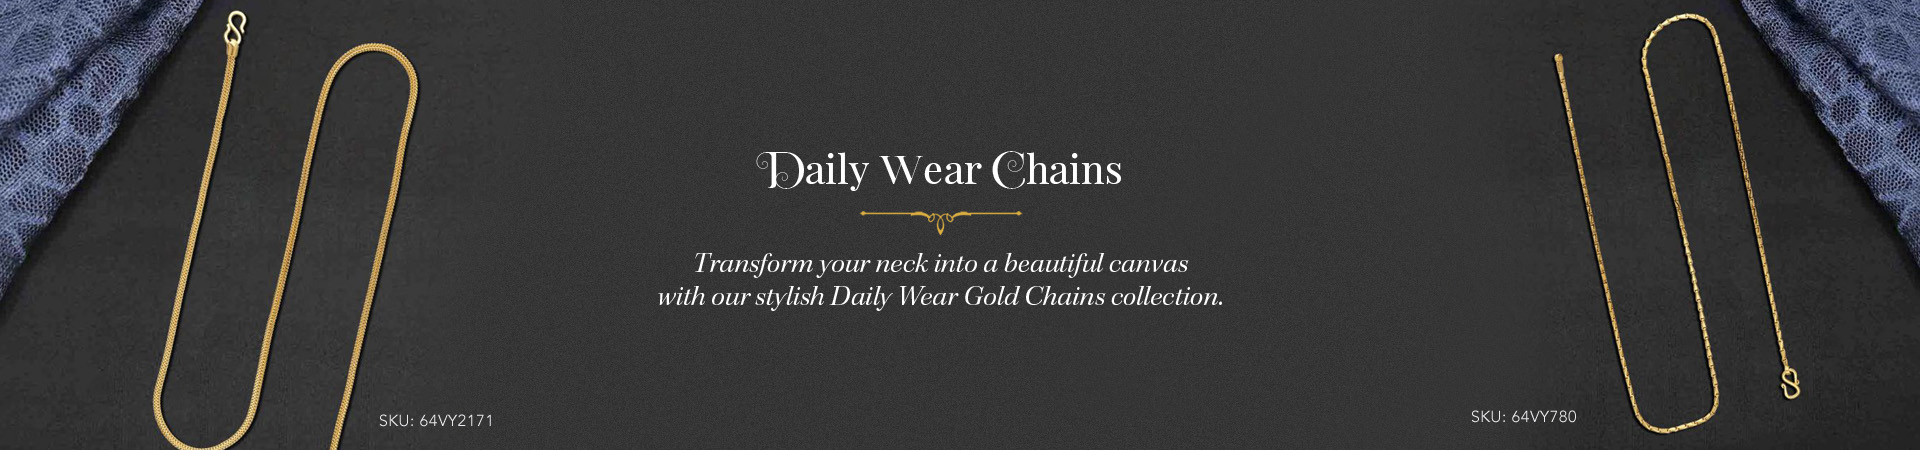 Daily Wear Chains